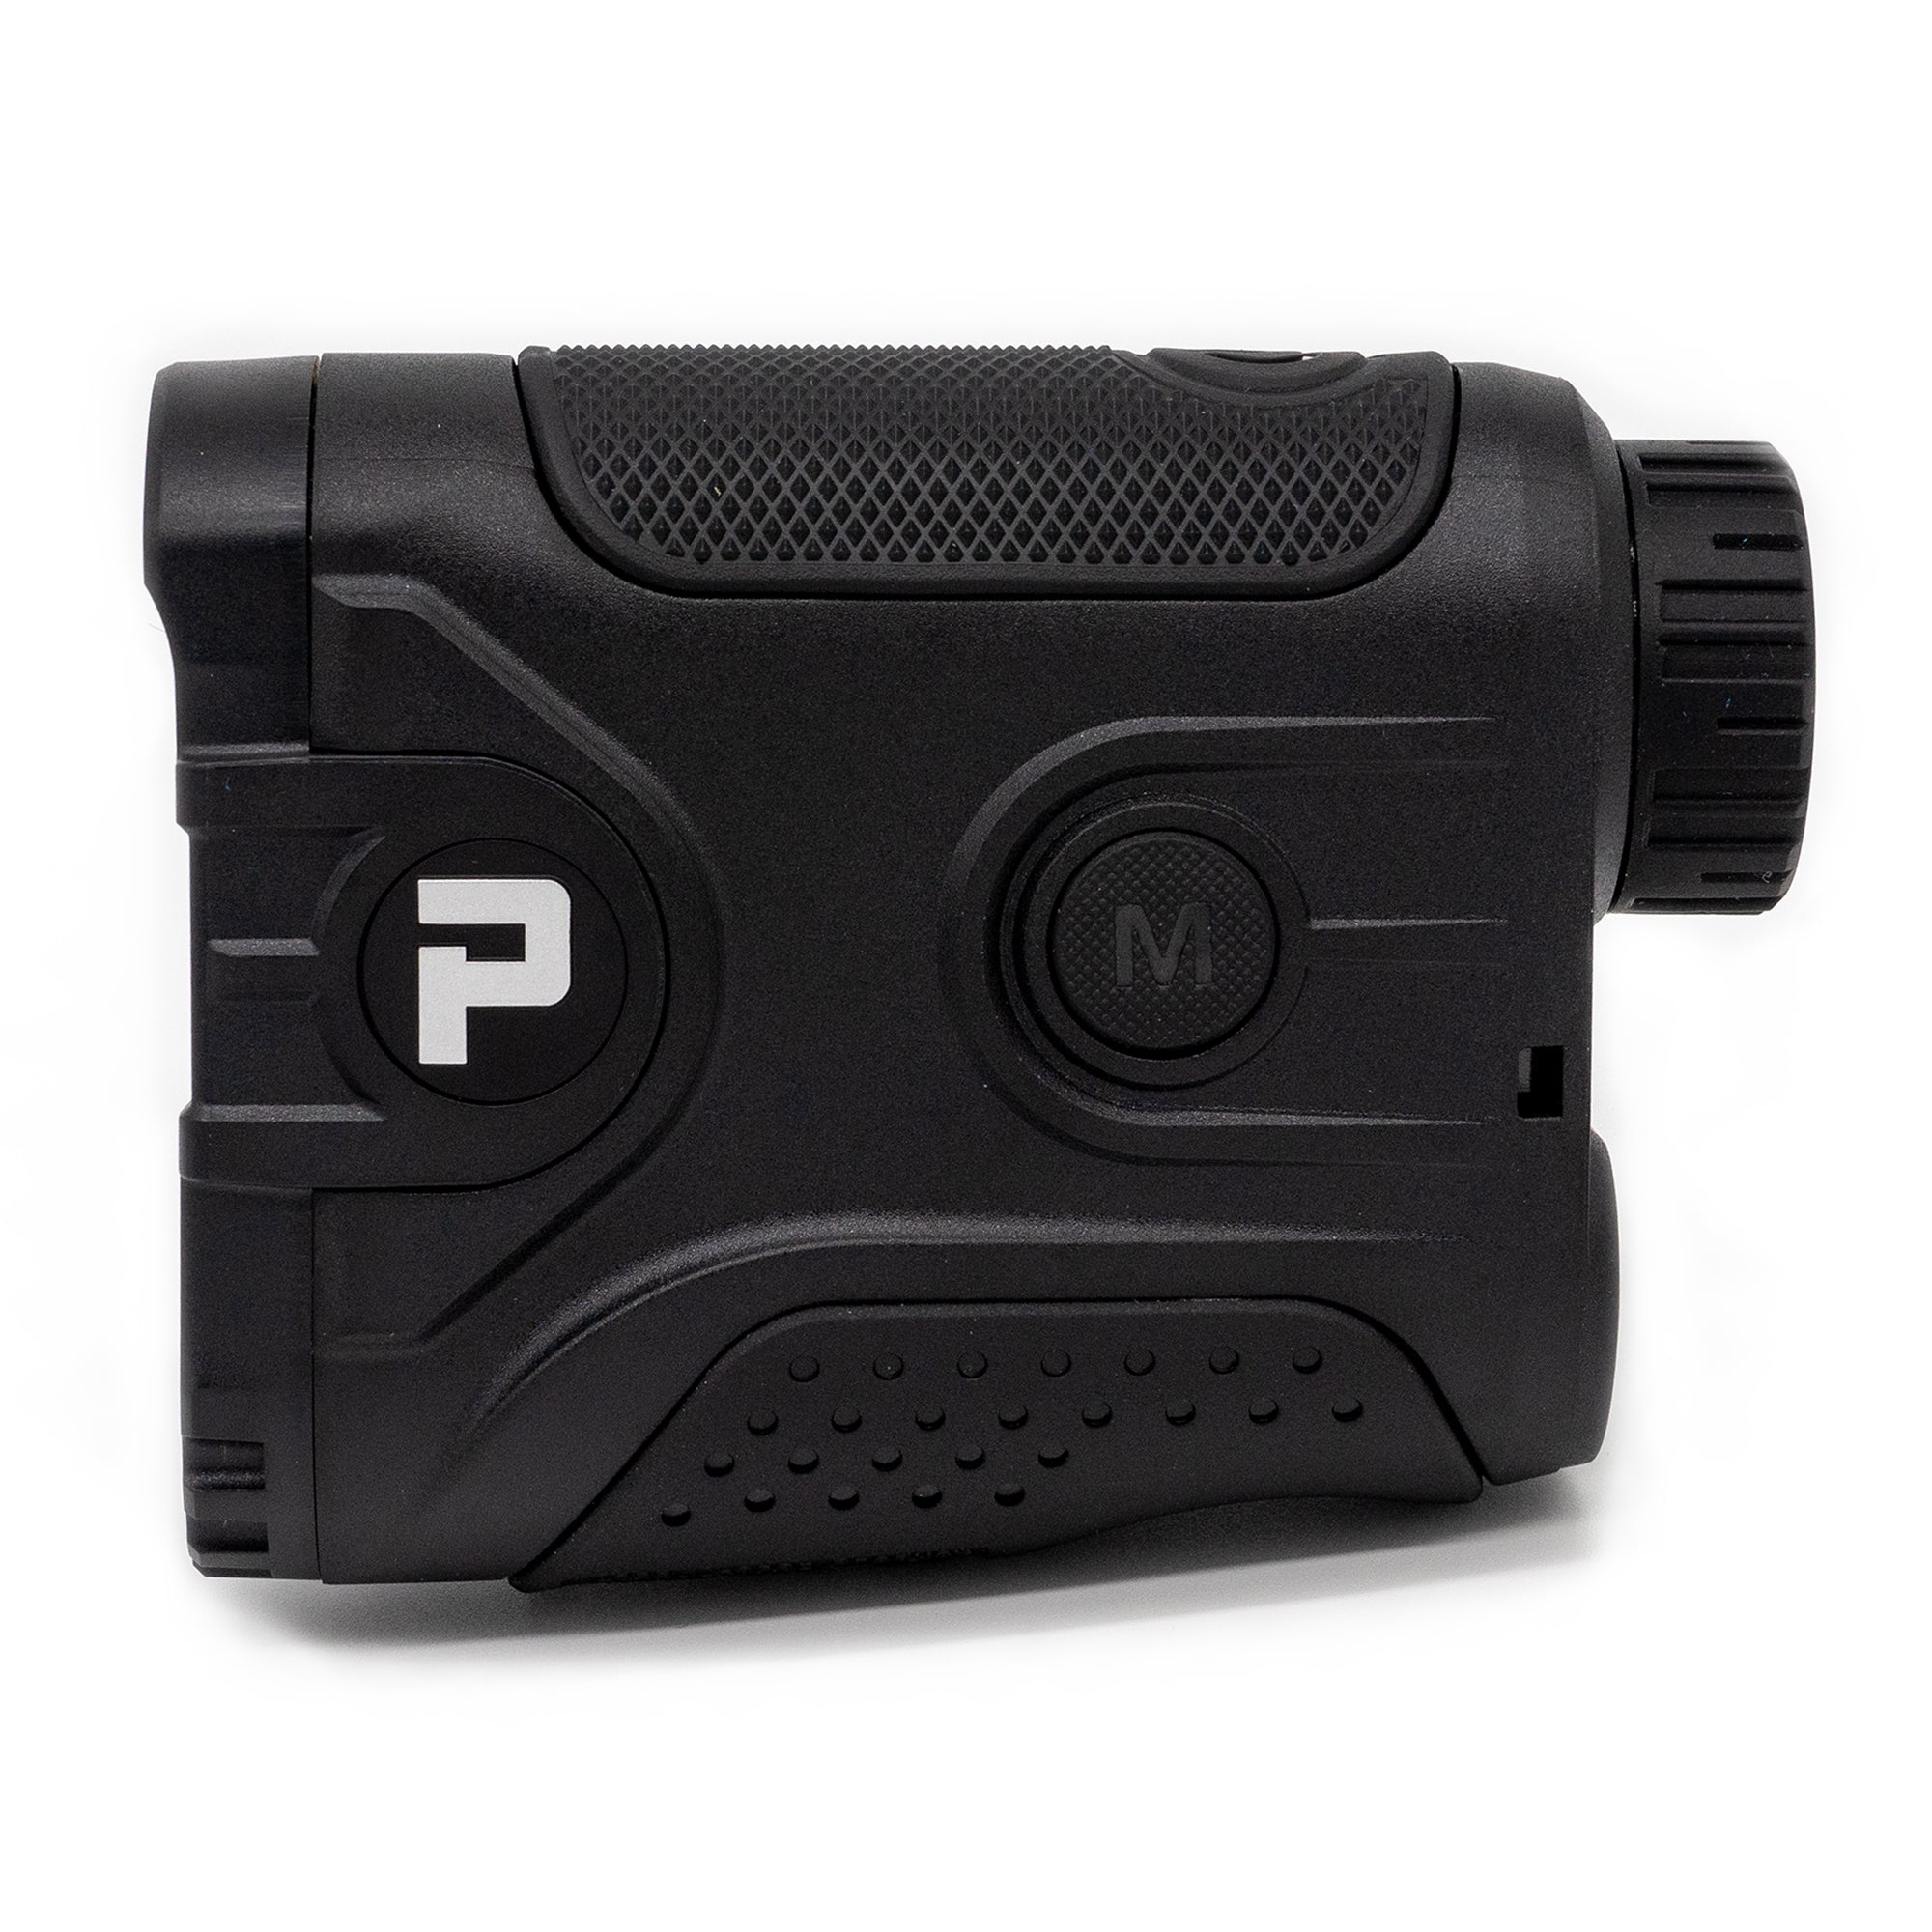 
                  
                    Pursuit Series Rangefinder, 2000 Yard Range, +/-1yd. Accuracy, 6x21, 0.1 Sec Response Time, Laser Rangefinder for Hunting, Shooting and Golfing with Red OLED Display
                  
                